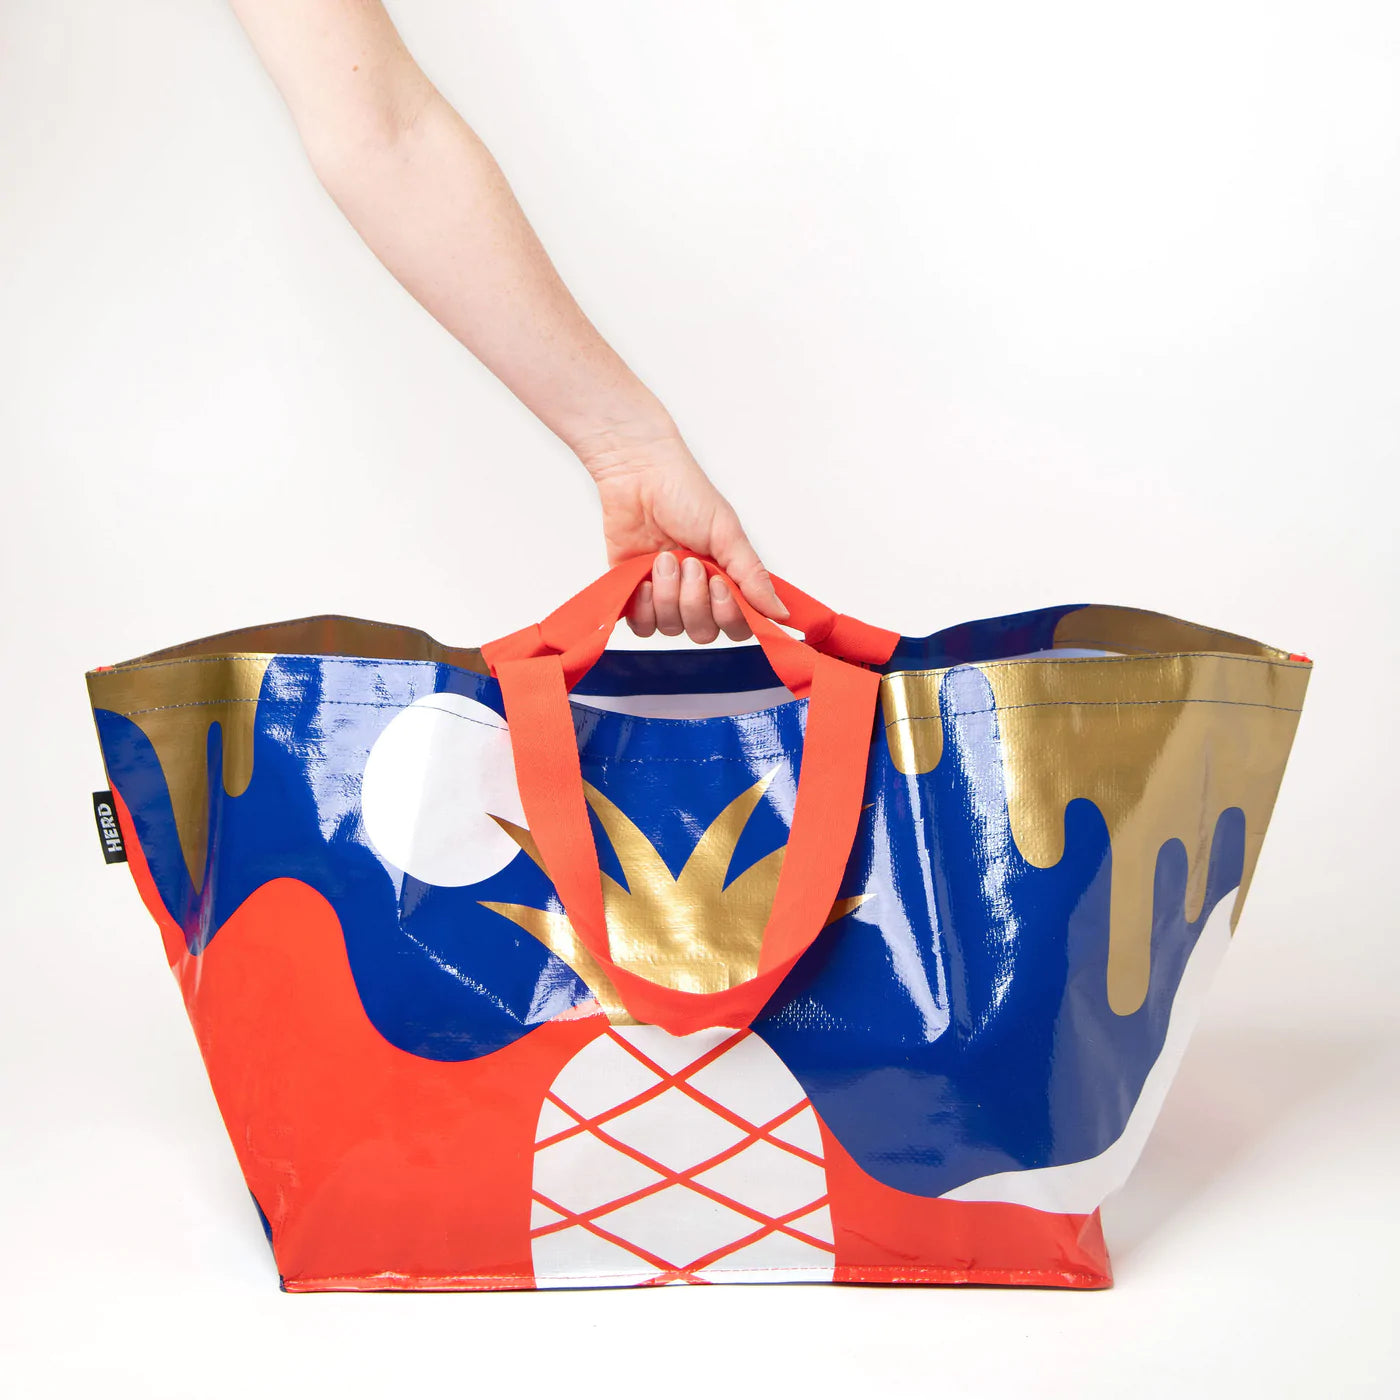 HERD - The Hot Pîna 100 Large Tote